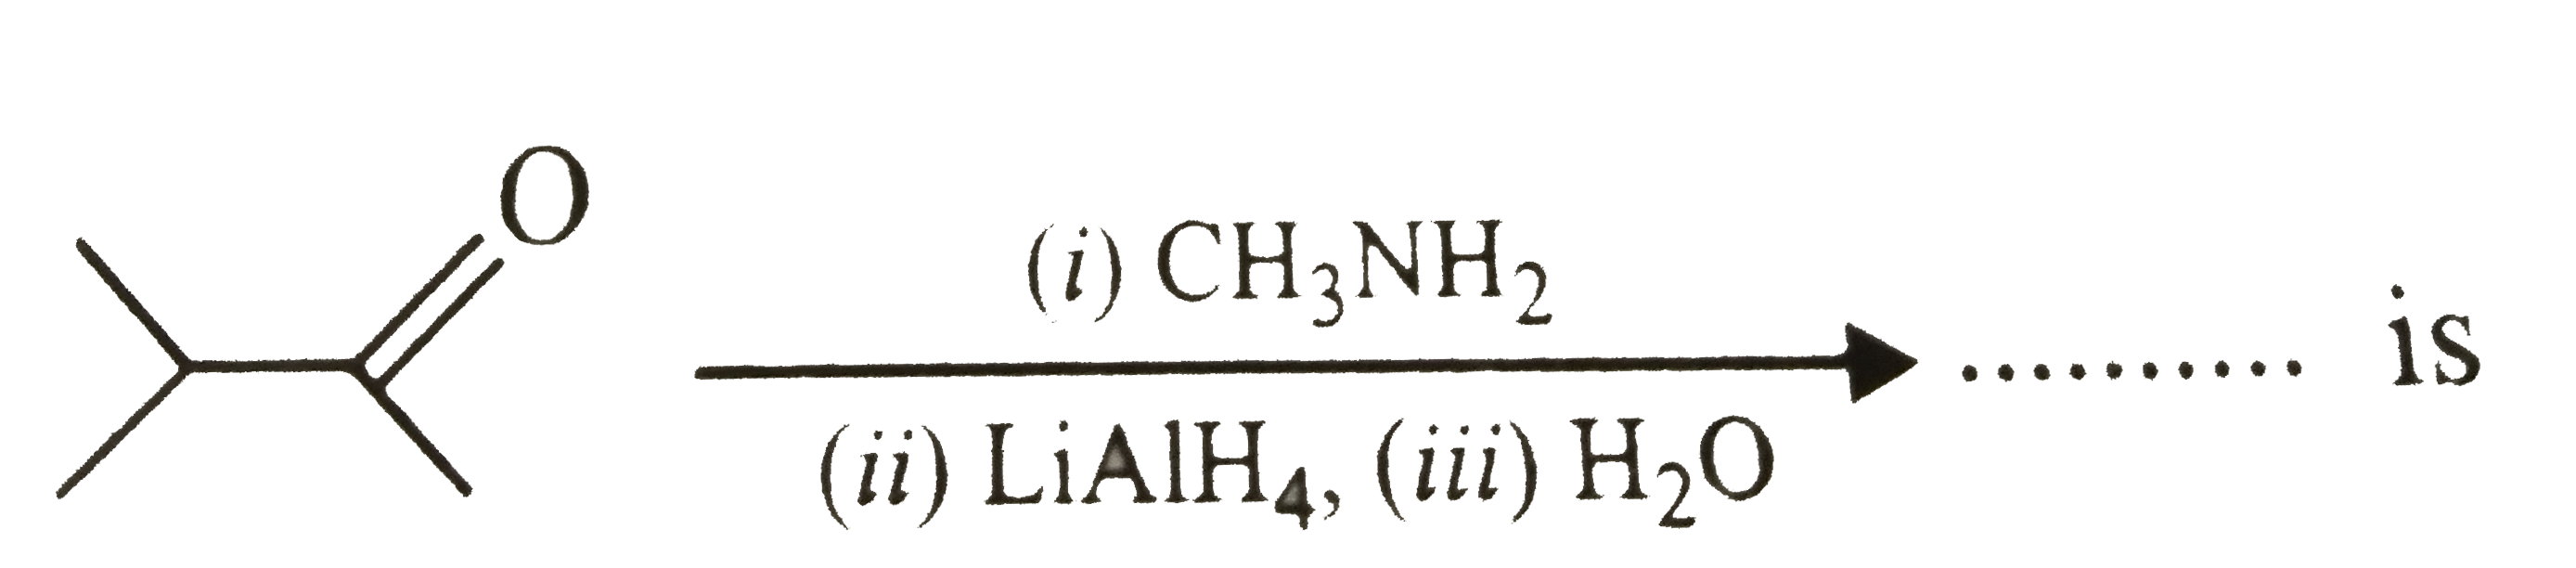 The major organic product formed from the following reaction